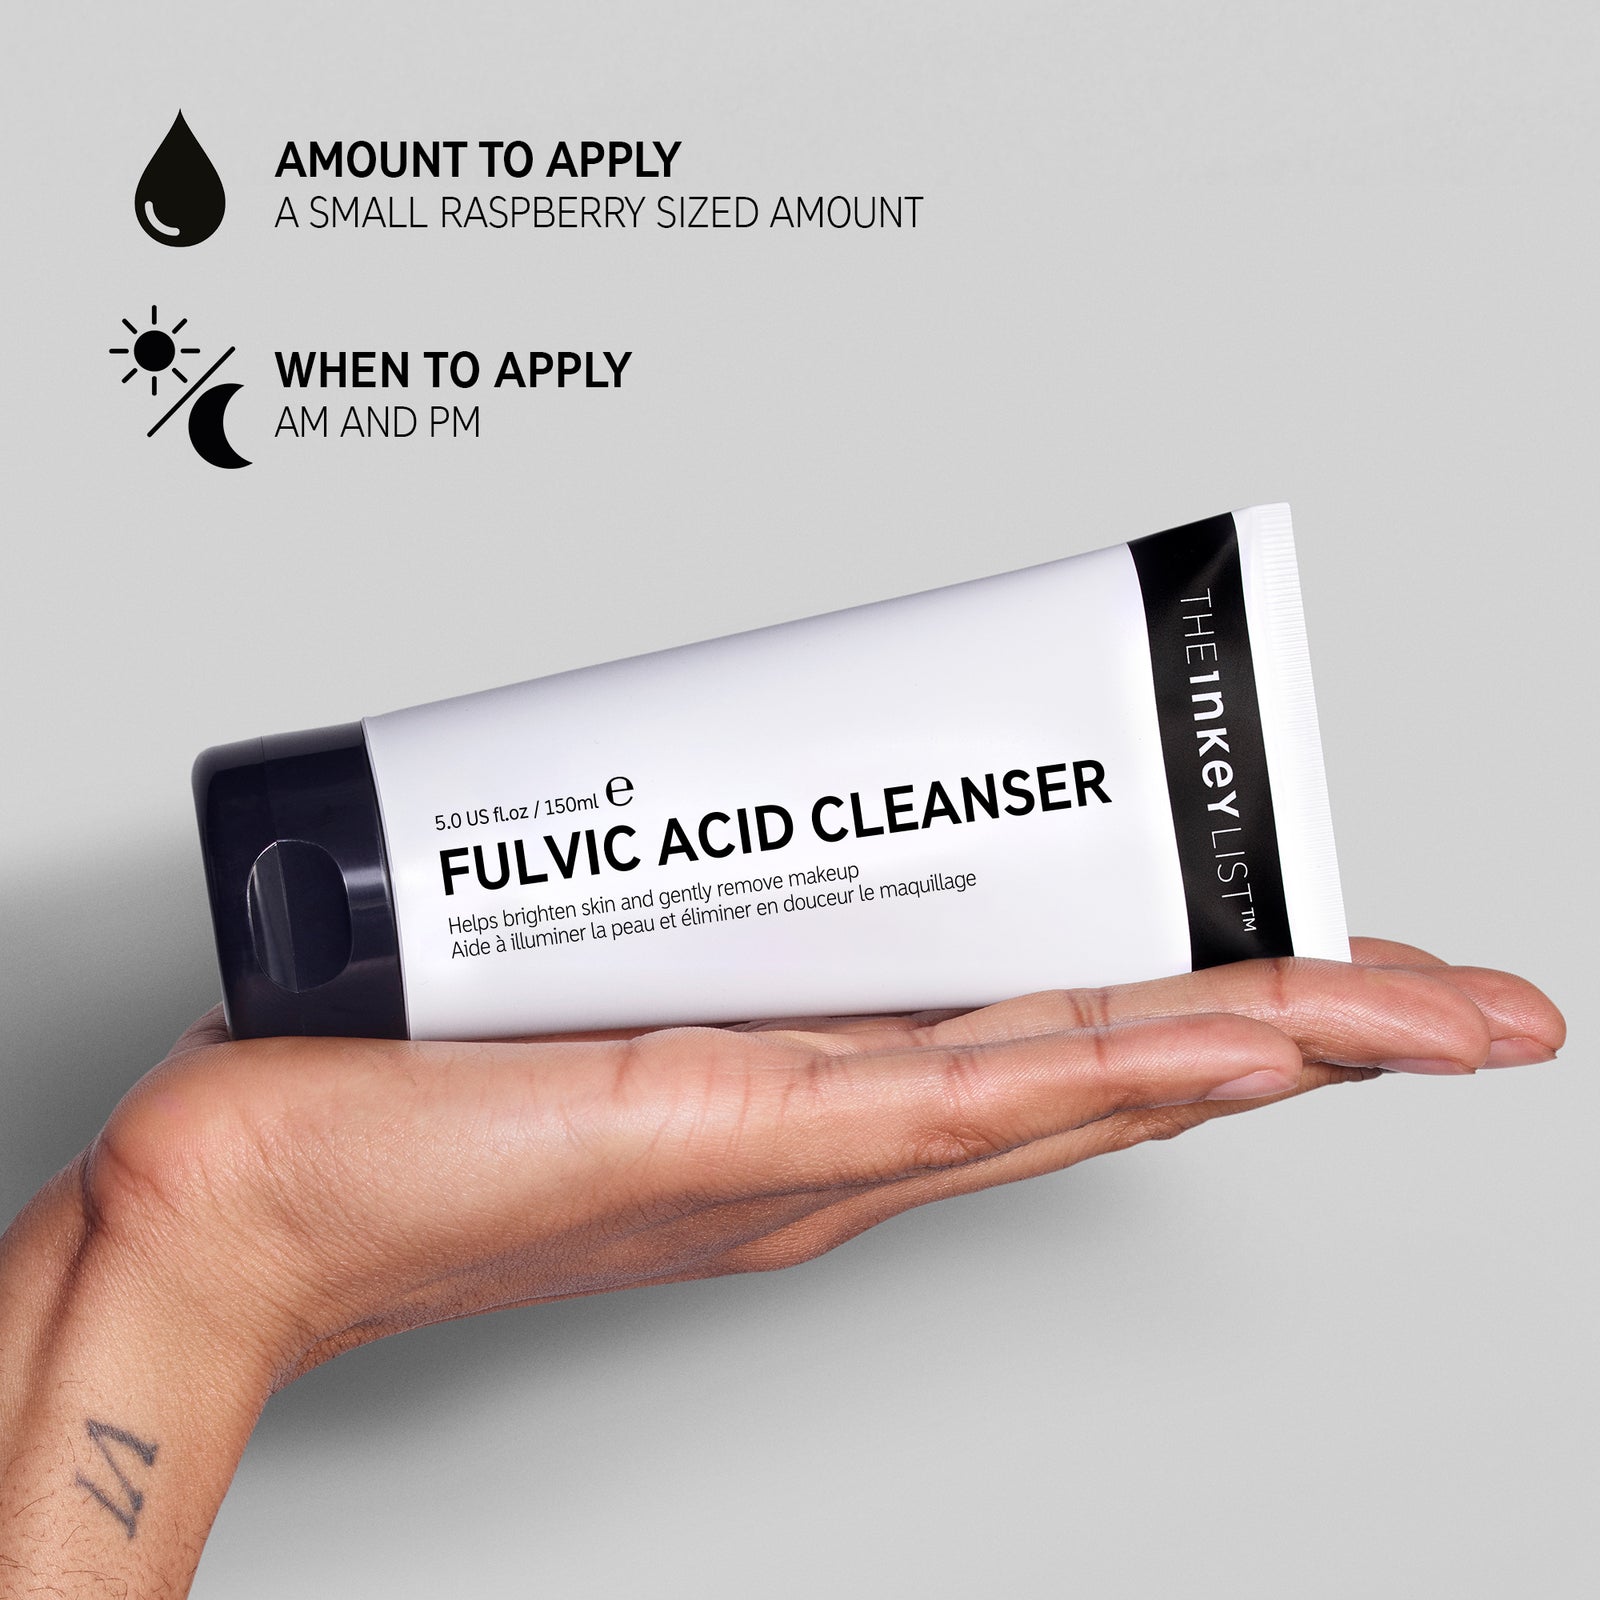 Hand holding Fulvic Acid Cleanser with text explaining amount to apply (small raspberry sized amount) and when to use it in your routine (AM and PM)